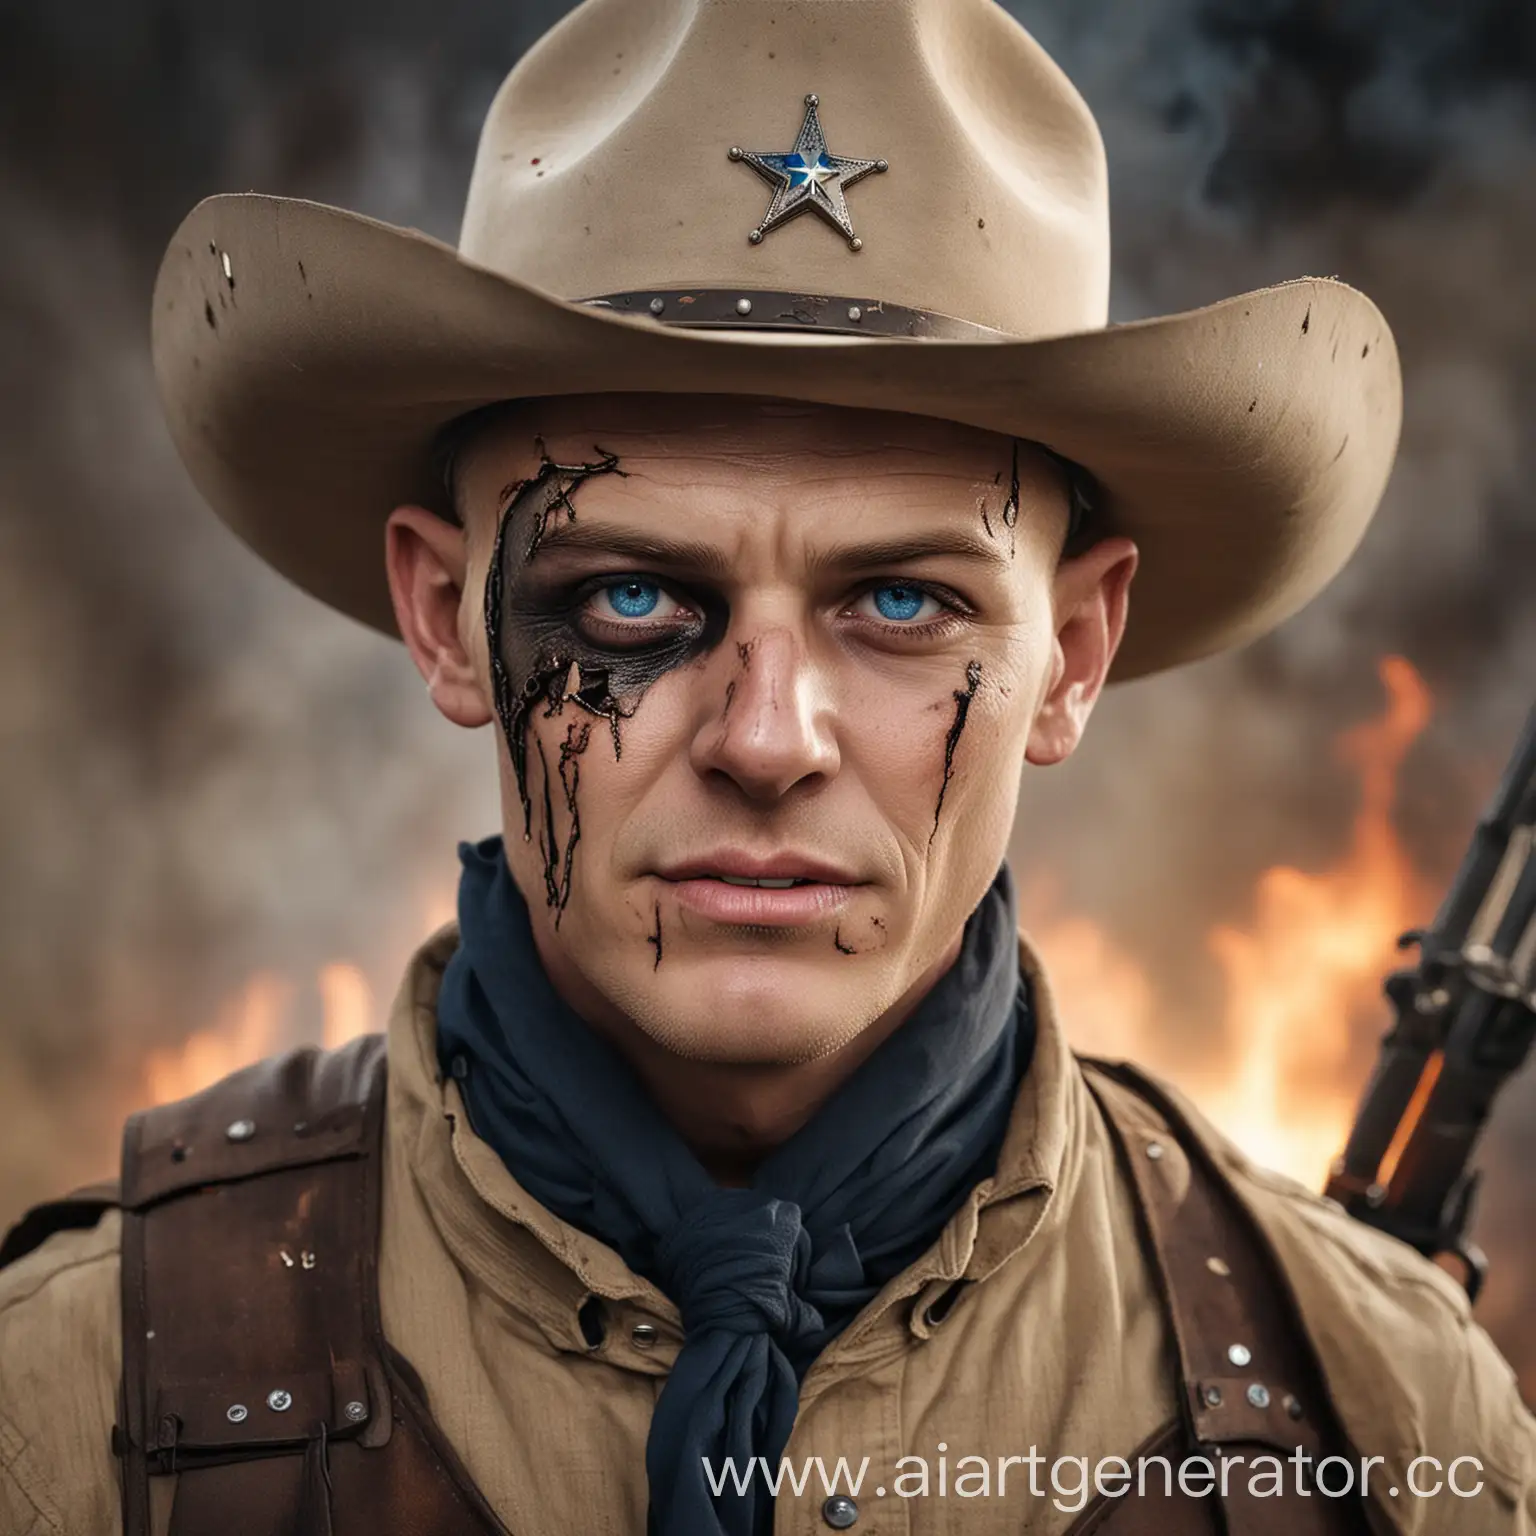 Bald-Cowboy-with-Eye-Patch-and-Rifle-Sheriff-Star-on-Chest